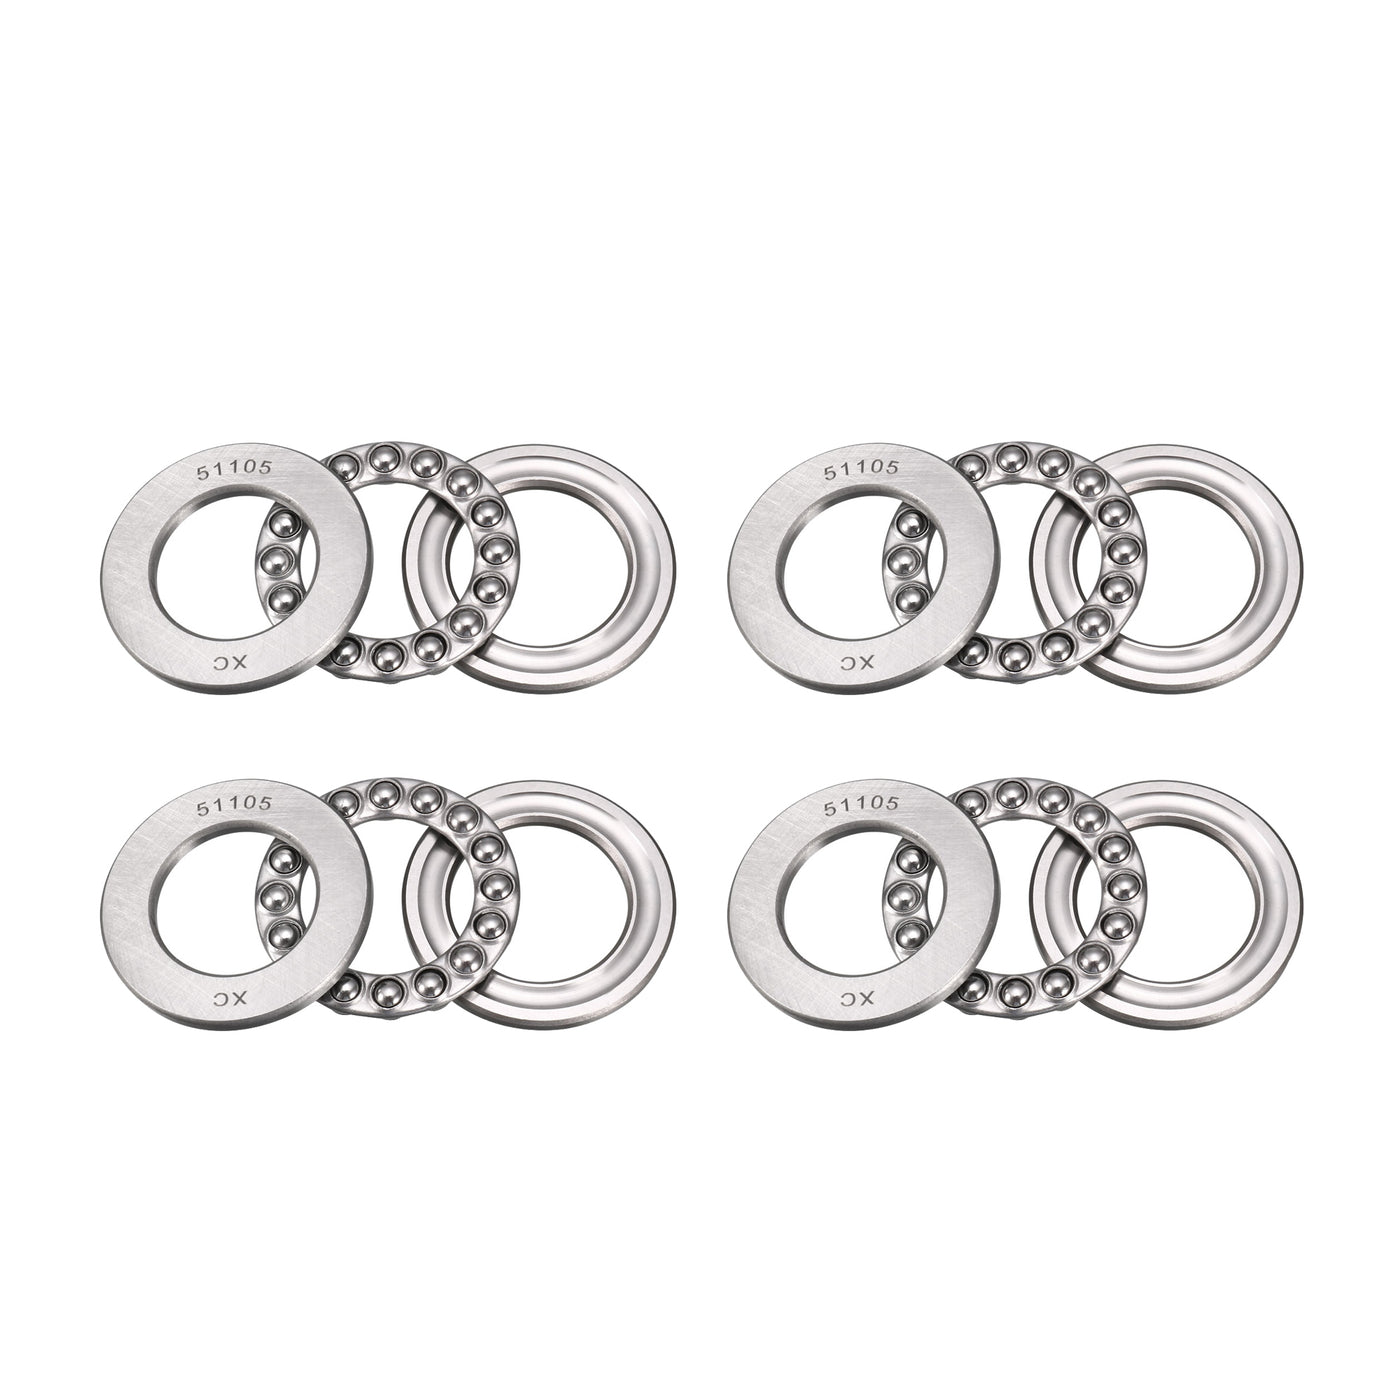 uxcell Uxcell 51105 Miniature Thrust Ball Bearing 25x42x11mm Chrome Steel with Washer 4pcs